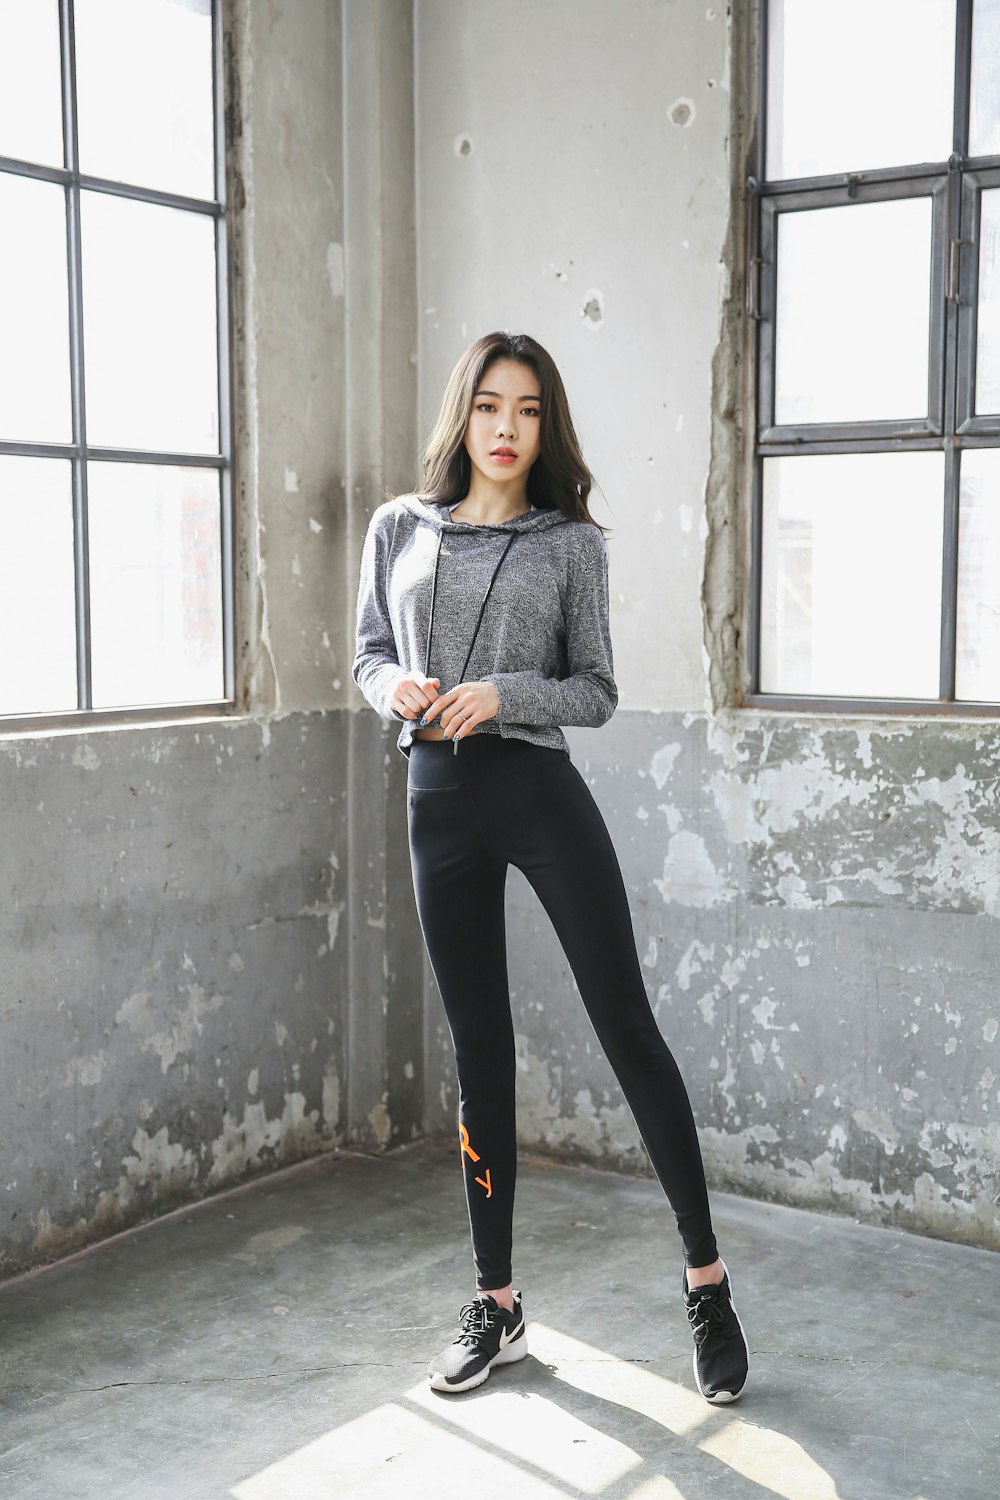 Woman in gray sweater and black pants standing beside window during daytime  photo – Free Grey Image on Unsplash